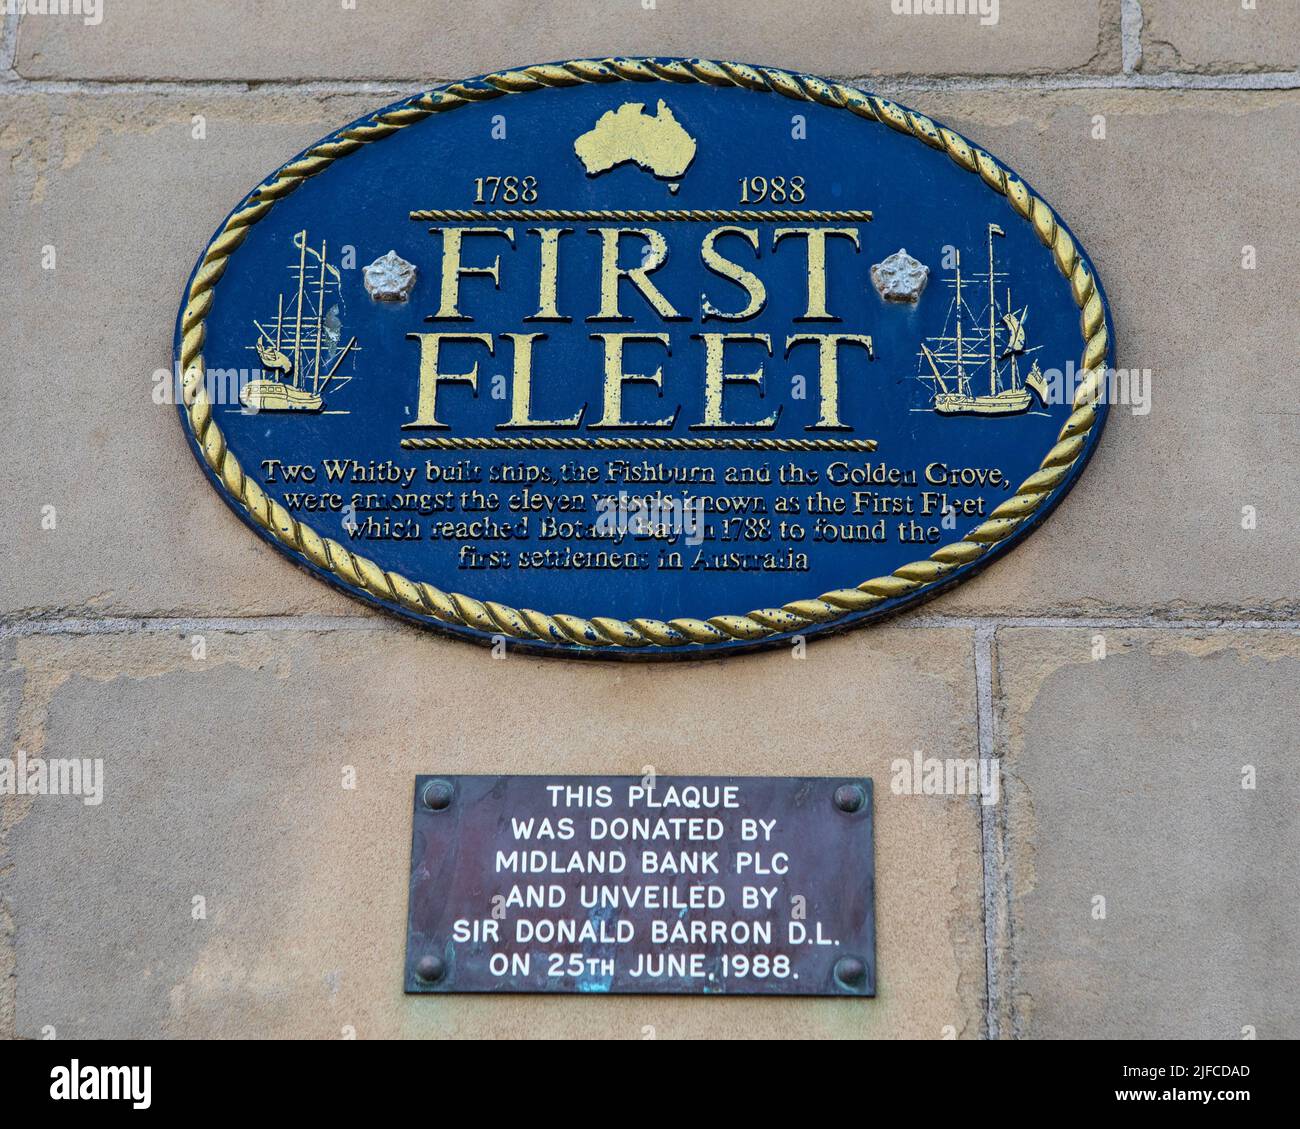 Whitby, UK - June 10th 2022: Plaque in Whitby, Yorkshire, commemorating two Whitby-built ships among the 1st vessels to reach Botany Bay and found the Stock Photo